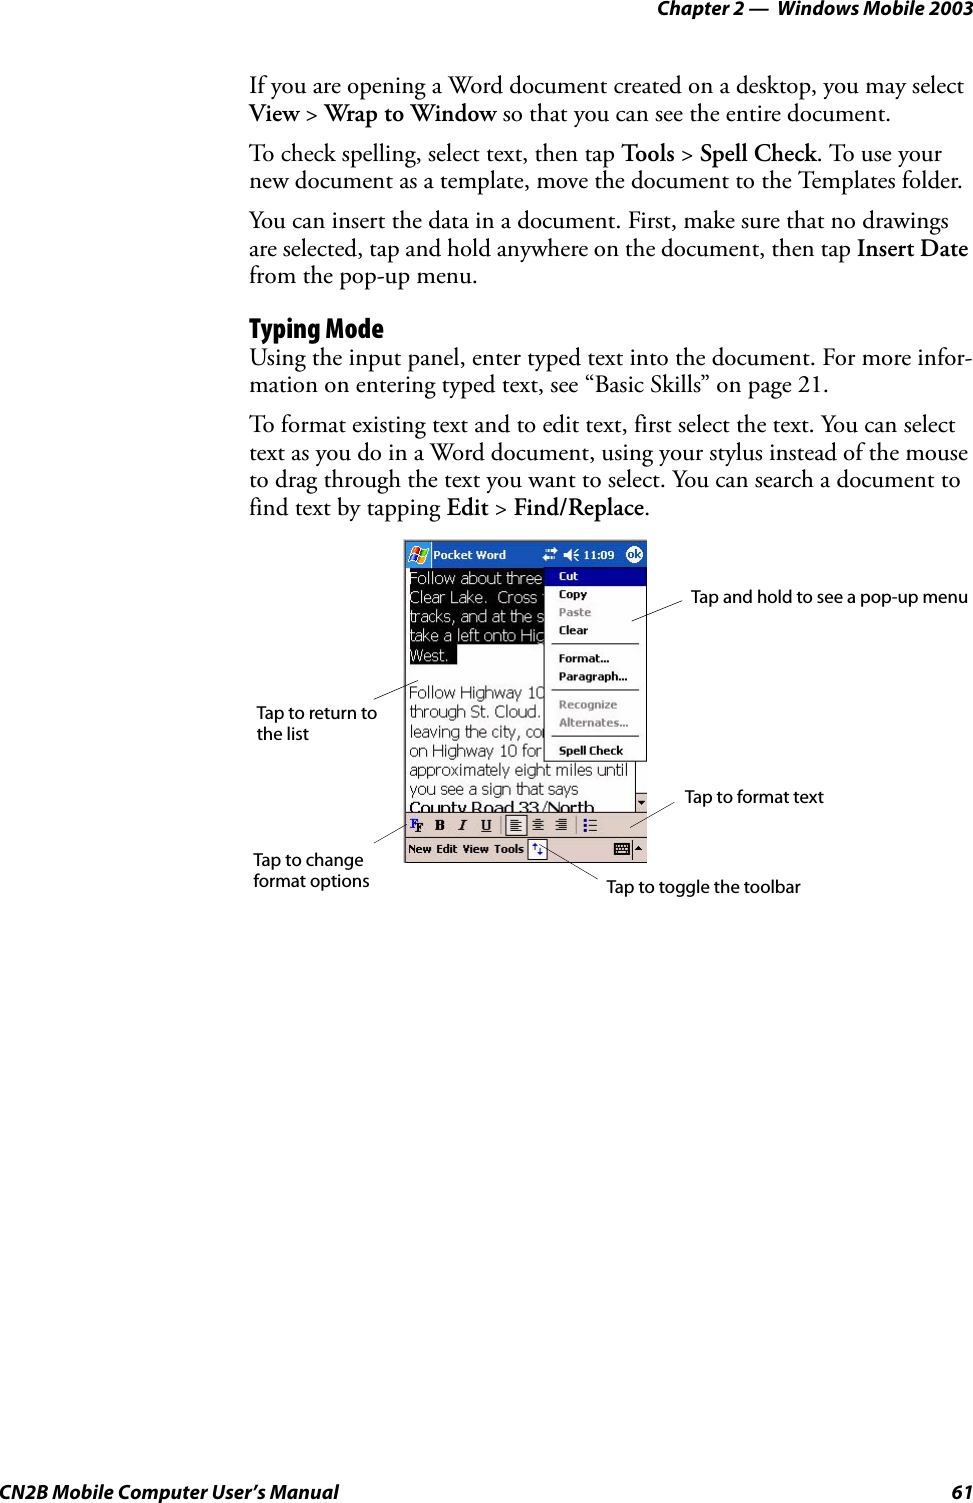 Chapter 2 —  Windows Mobile 2003CN2B Mobile Computer User’s Manual 61If you are opening a Word document created on a desktop, you may select View &gt; Wrap to Window so that you can see the entire document.To check spelling, select text, then tap To o l s  &gt; Spell Check. To use your new document as a template, move the document to the Templates folder.You can insert the data in a document. First, make sure that no drawings are selected, tap and hold anywhere on the document, then tap Insert Date from the pop-up menu.Typing ModeUsing the input panel, enter typed text into the document. For more infor-mation on entering typed text, see “Basic Skills” on page 21.To format existing text and to edit text, first select the text. You can select text as you do in a Word document, using your stylus instead of the mouse to drag through the text you want to select. You can search a document to find text by tapping Edit &gt; Find/Replace.Tap and hold to see a pop-up menuTap to return to the listTap to changeformat optionsTap to format textTap to toggle the toolbar